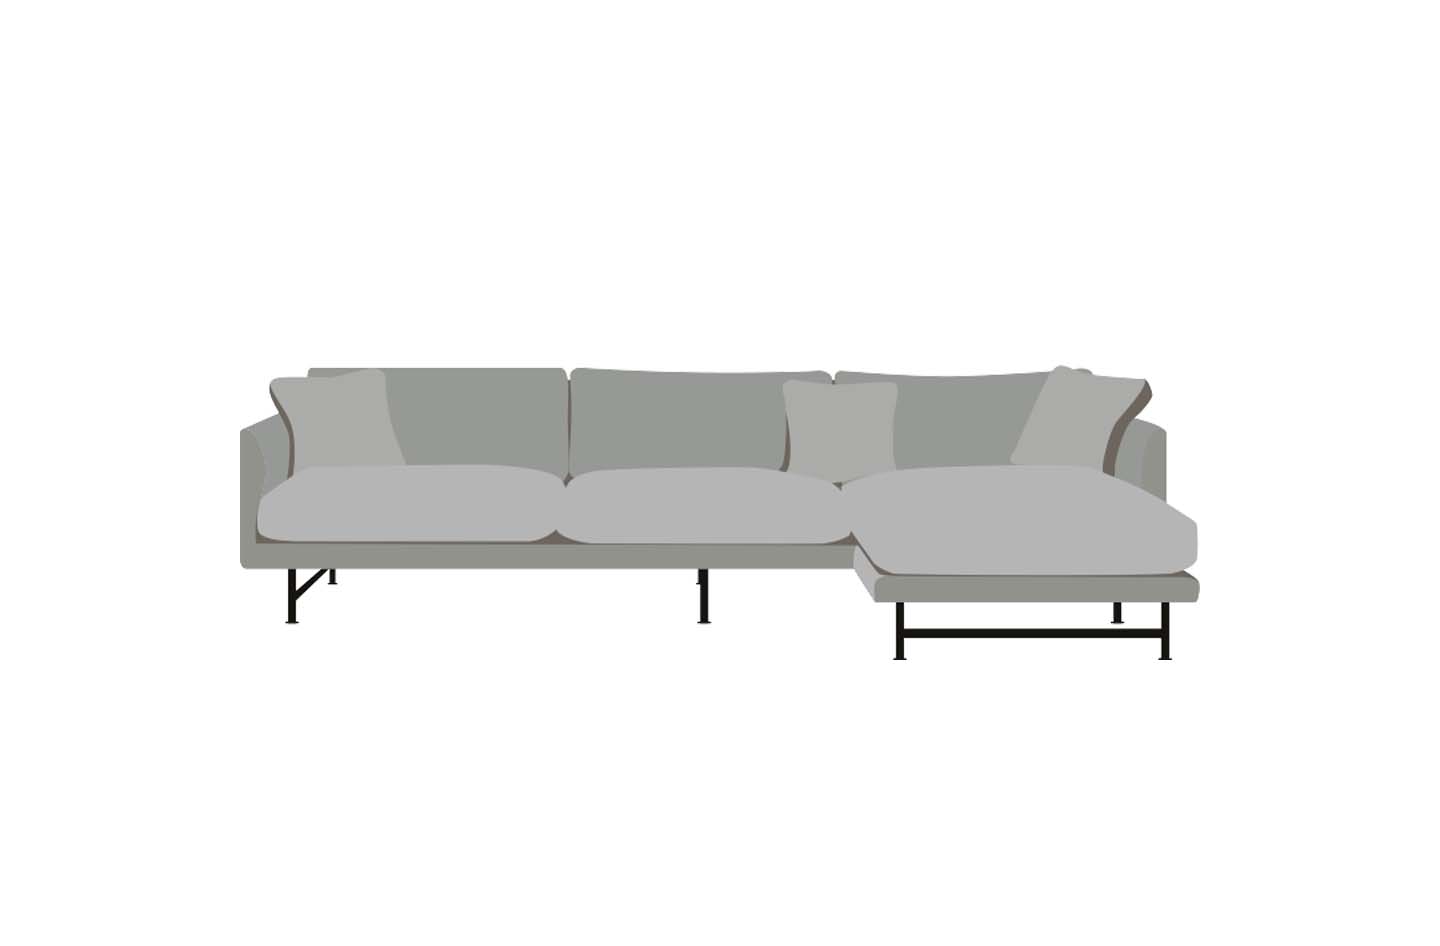 most popular sofa types featured image Olson and Baker - Designer & Contemporary Sofas, Furniture - Olson and Baker showcases original designs from authentic, designer brands. Buy contemporary furniture, lighting, storage, sofas & chairs at Olson + Baker.